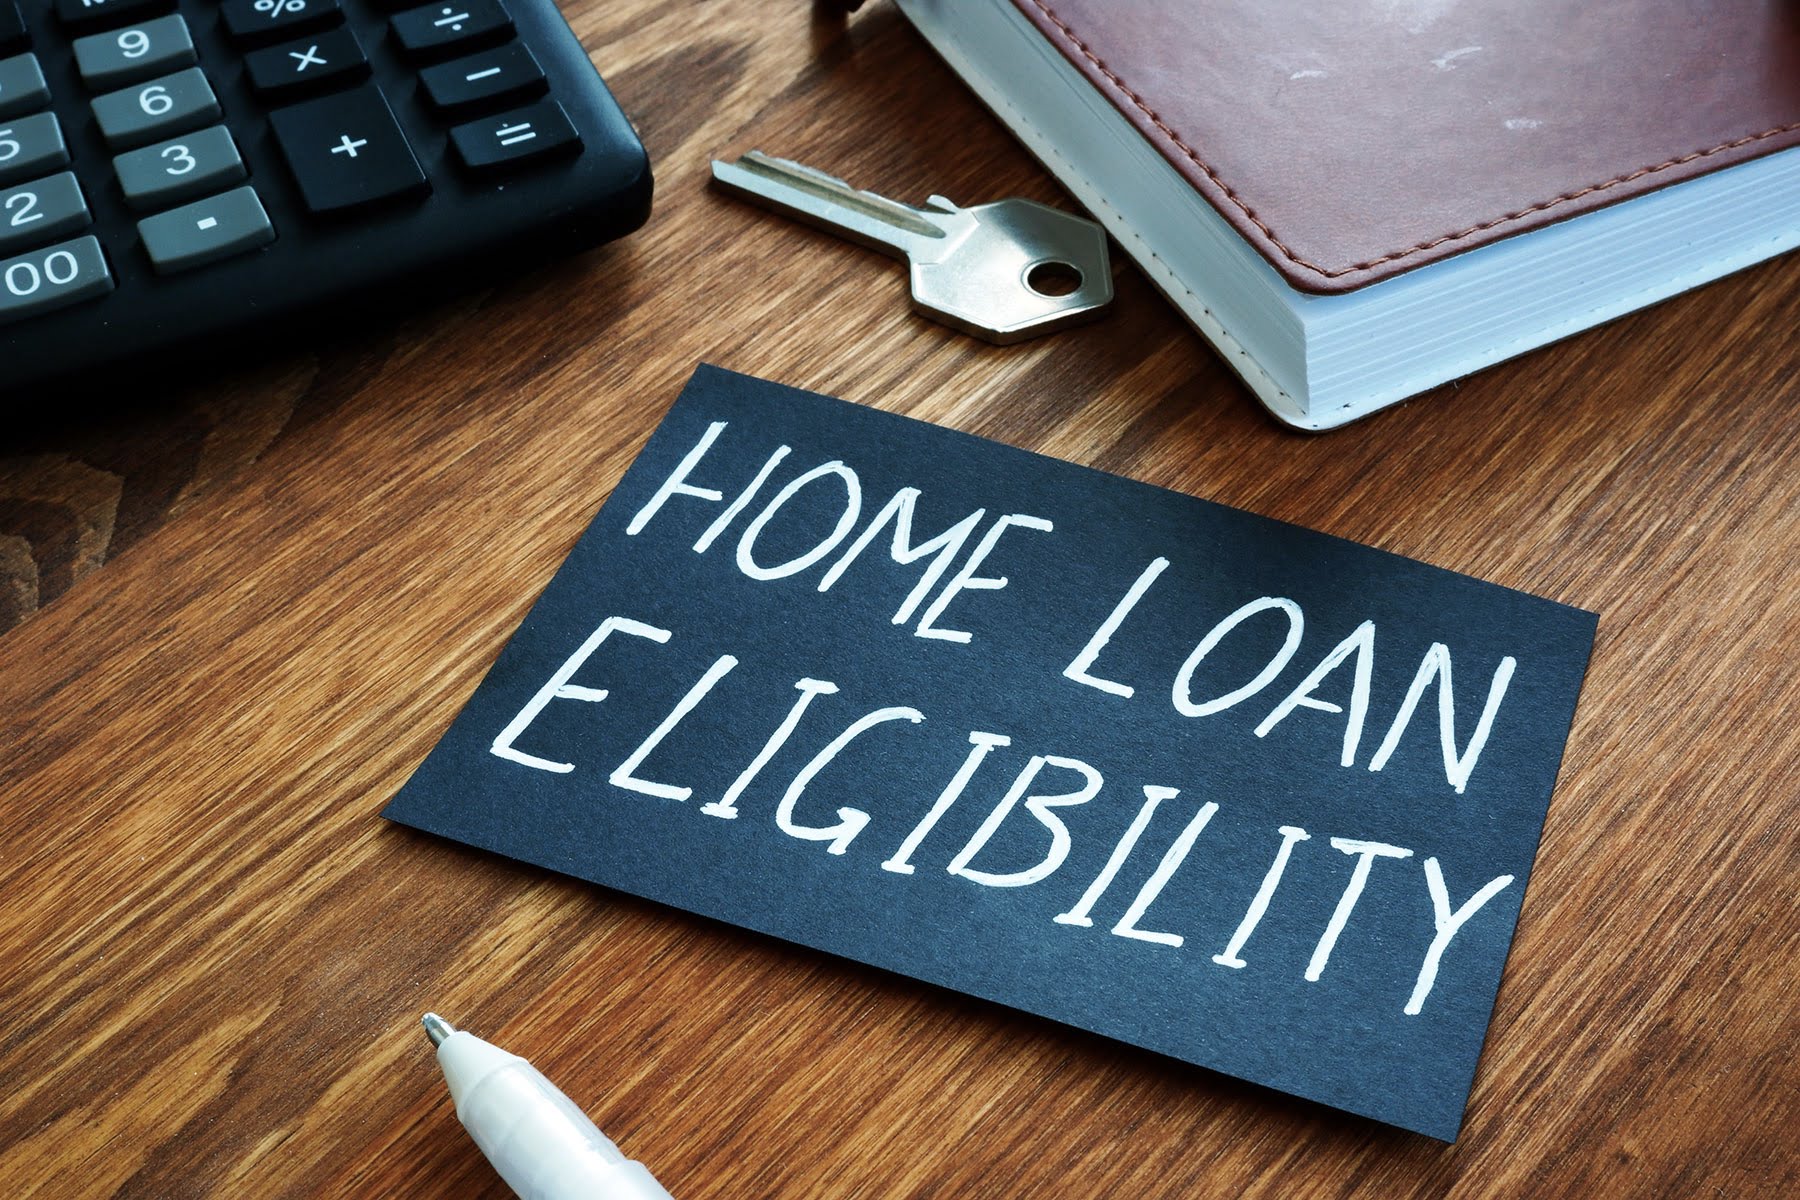 Housing Loan Certificate Of Eligibility Your Key To Home Financing